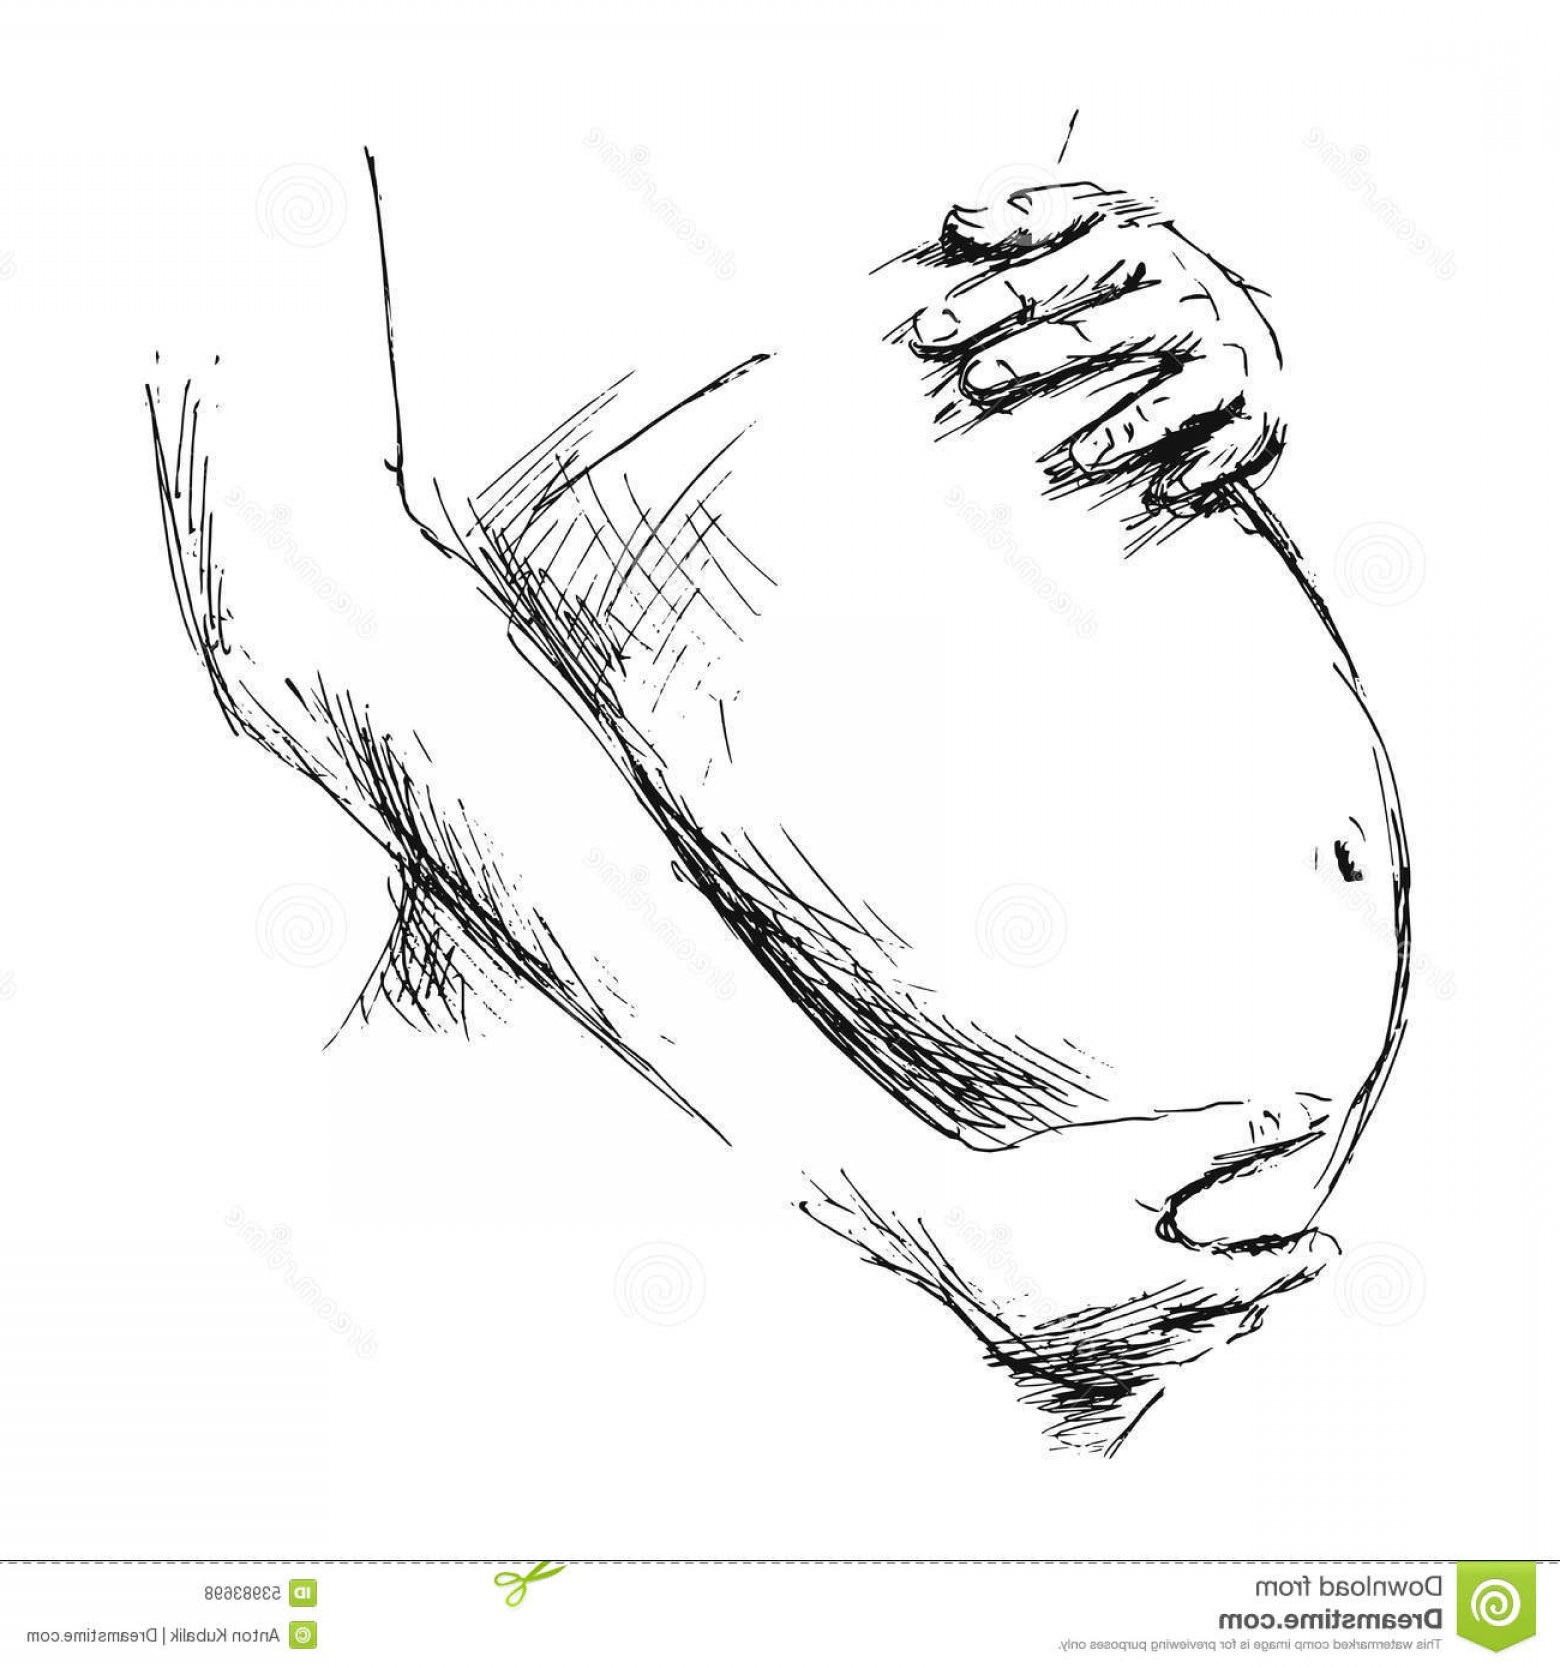 Pregnant paintings search result at